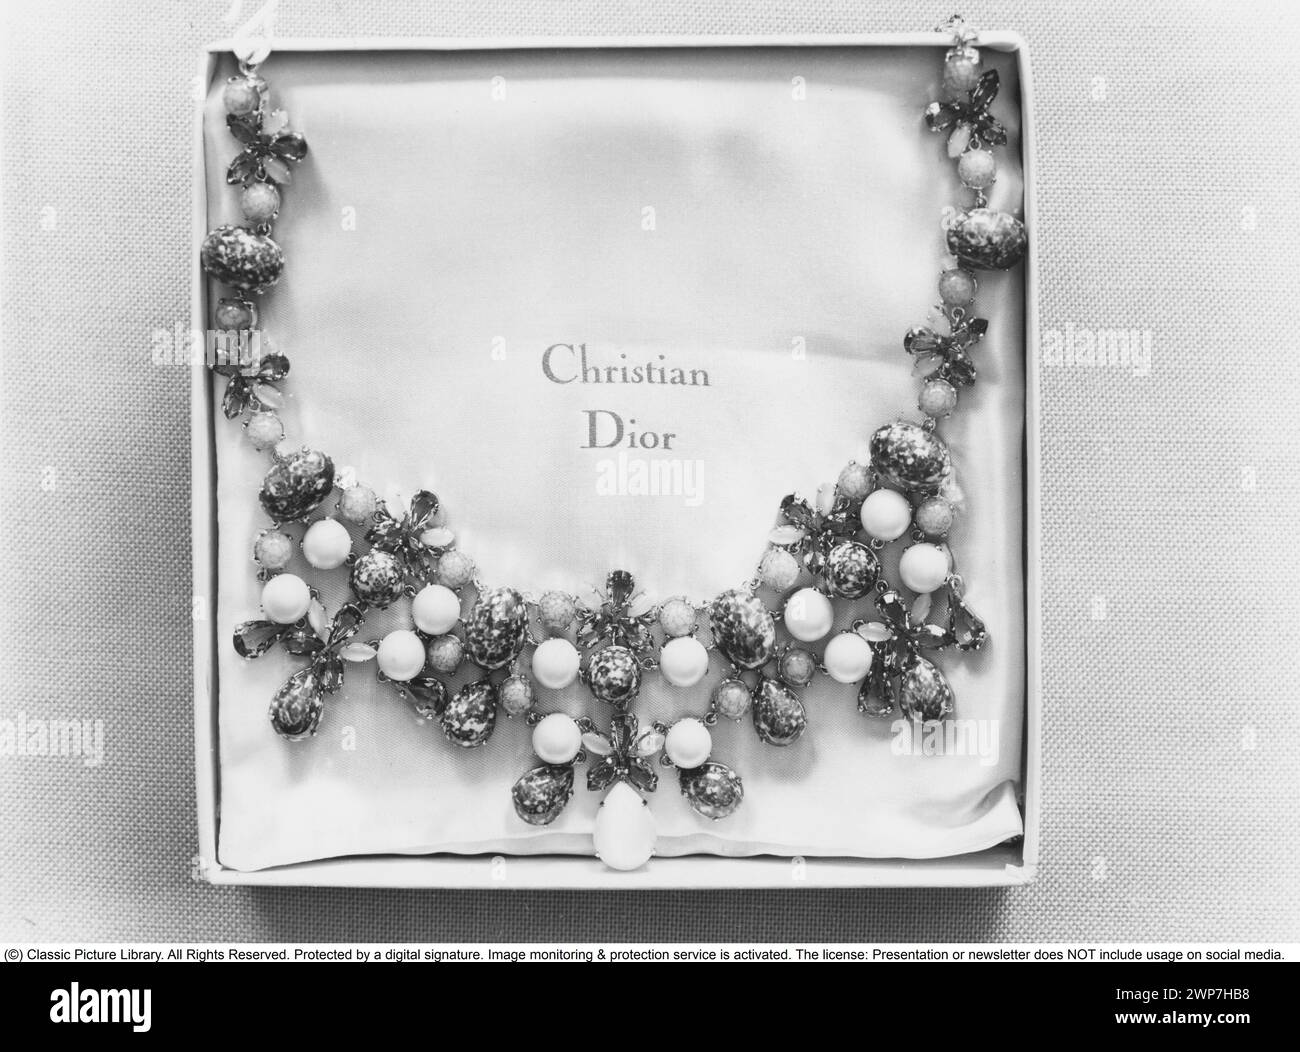 Christian Dior 1962. A necklace is in it's original box with the name Christian Dior printed on it. Stock Photo